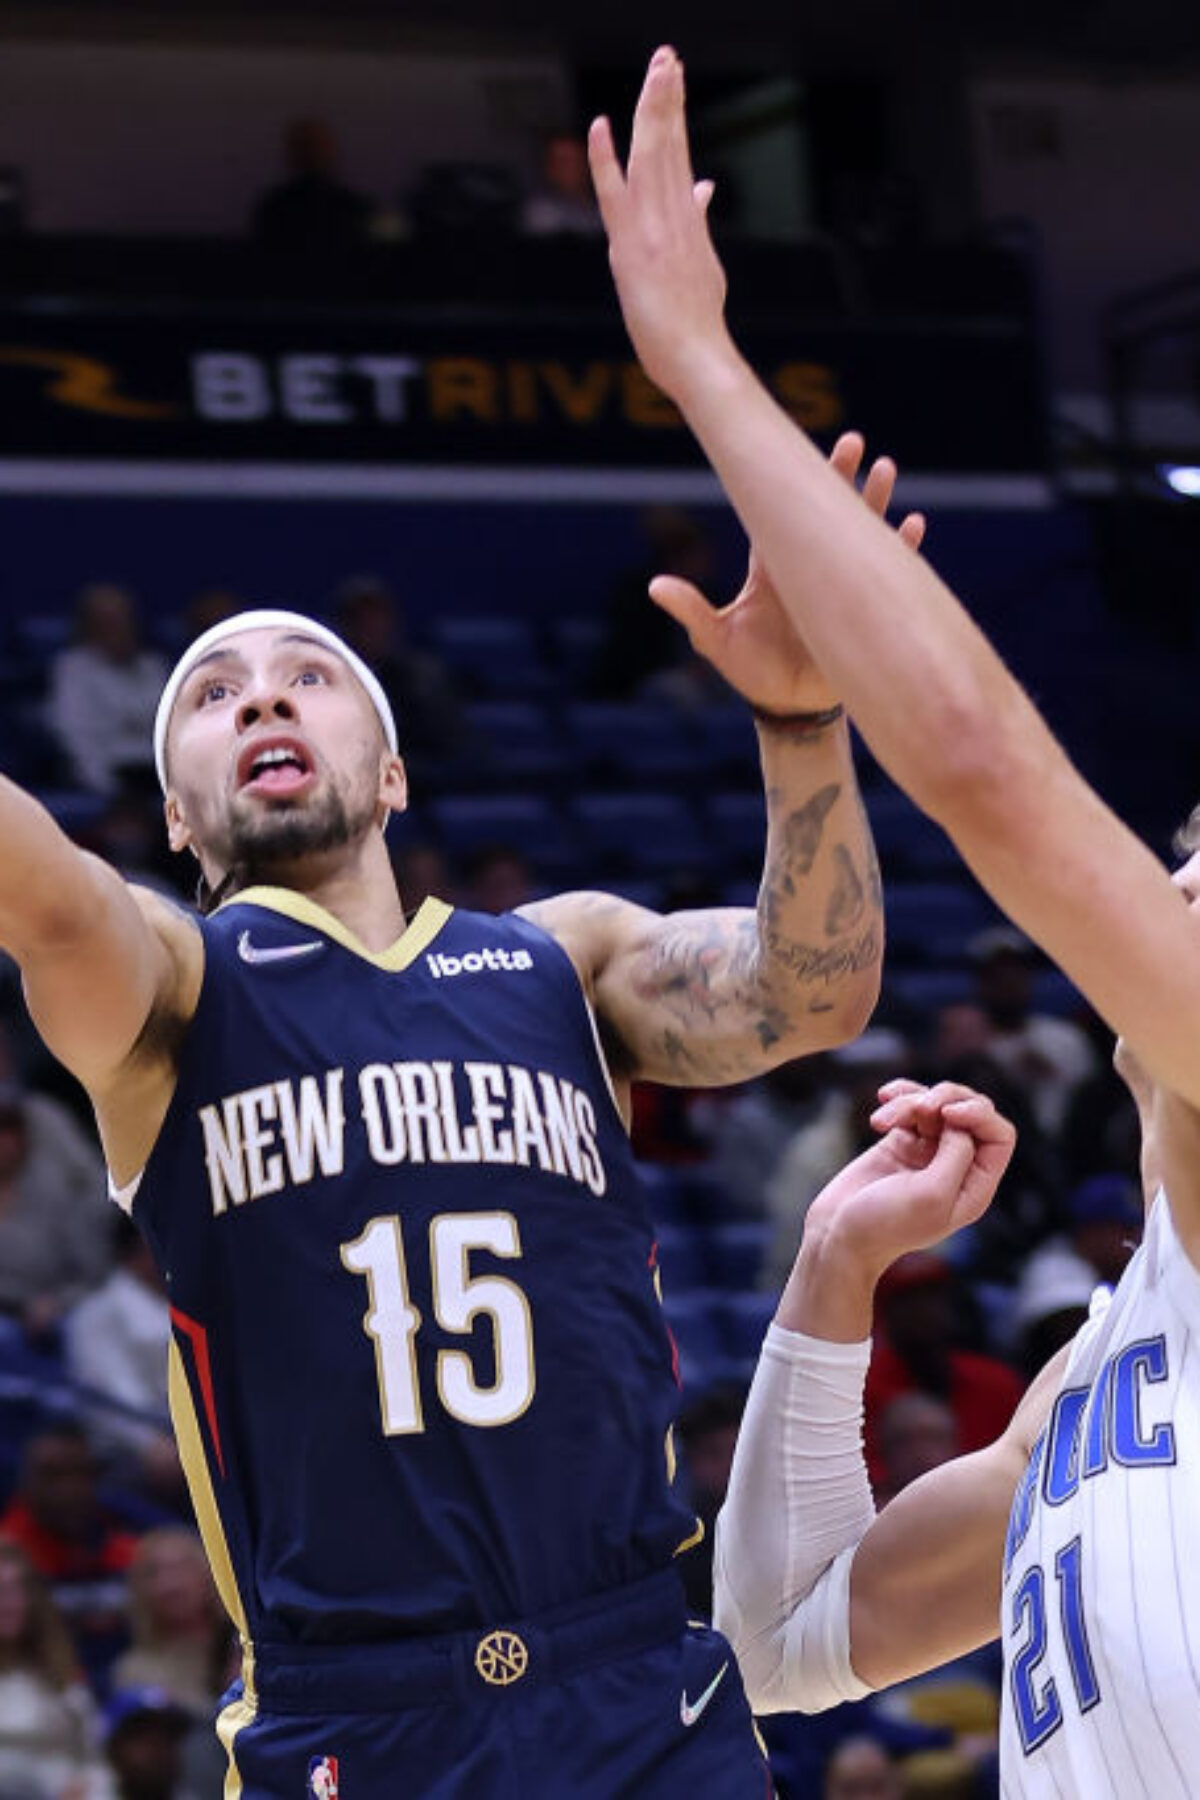 NEW ORLEANS, LOUISIANA - MARCH 09: Jose Alvarado #15 of the New Orleans Pelicans shoots against Moritz Wagner #21 of the Orlando Magic during the second half at the Smoothie King Center on March 09, 2022 in New Orleans, Louisiana. NOTE TO USER: User expressly acknowledges and agrees that, by downloading and or using this Photograph, user is consenting to the terms and conditions of the Getty Images License Agreement. (Photo by Jonathan Bachman/Getty Images)